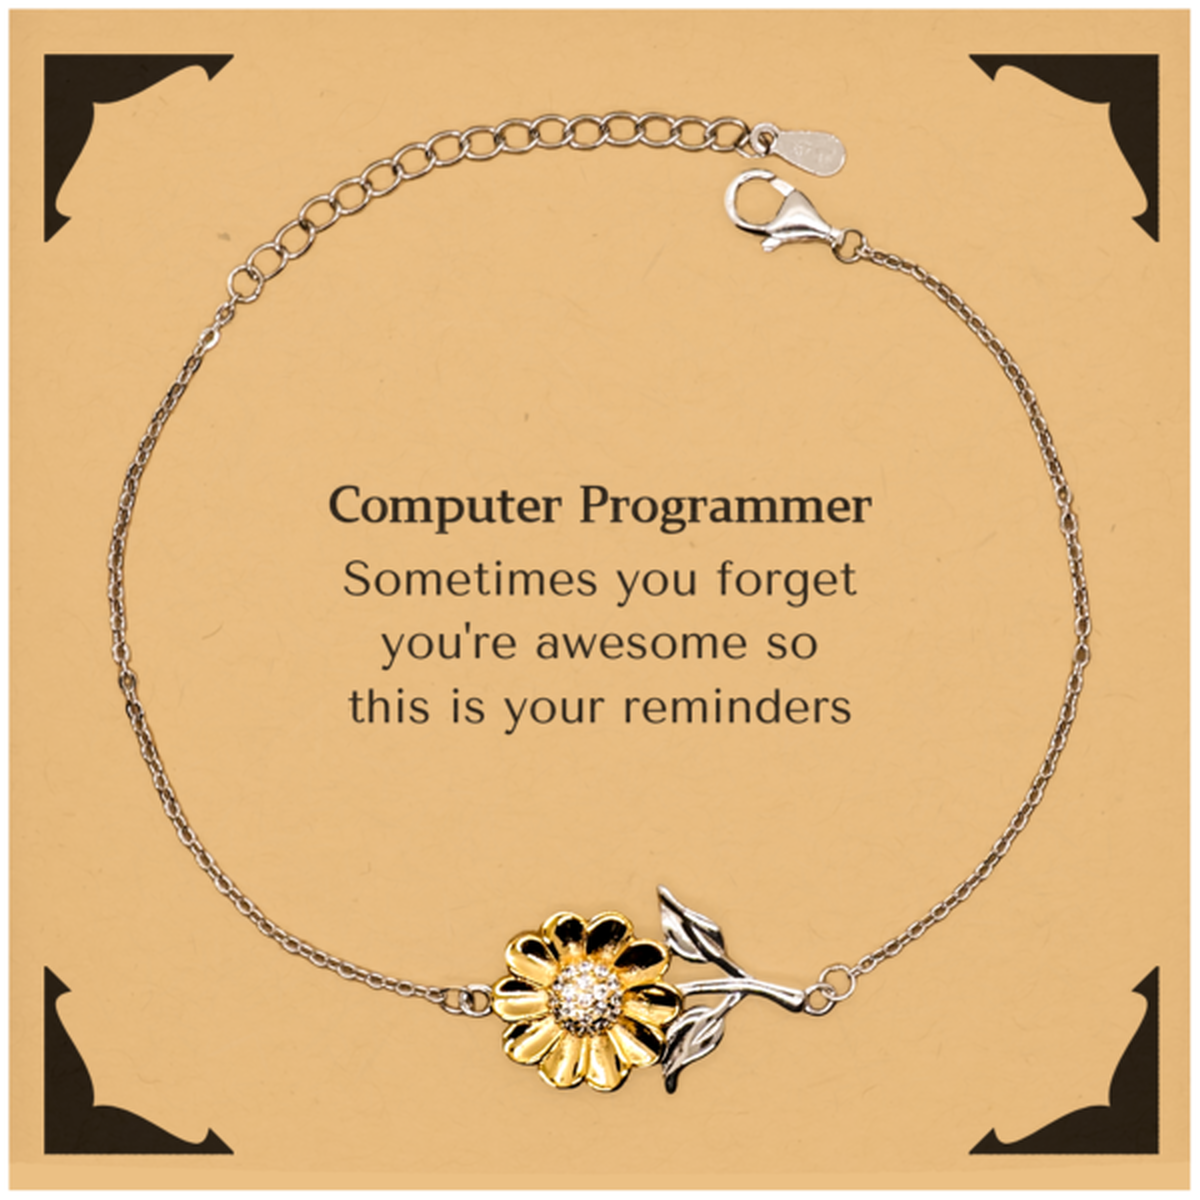 Sentimental Computer Programmer Sunflower Bracelet, Computer Programmer Sometimes you forget you're awesome so this is your reminders, Graduation Christmas Birthday Gifts for Computer Programmer, Men, Women, Coworkers